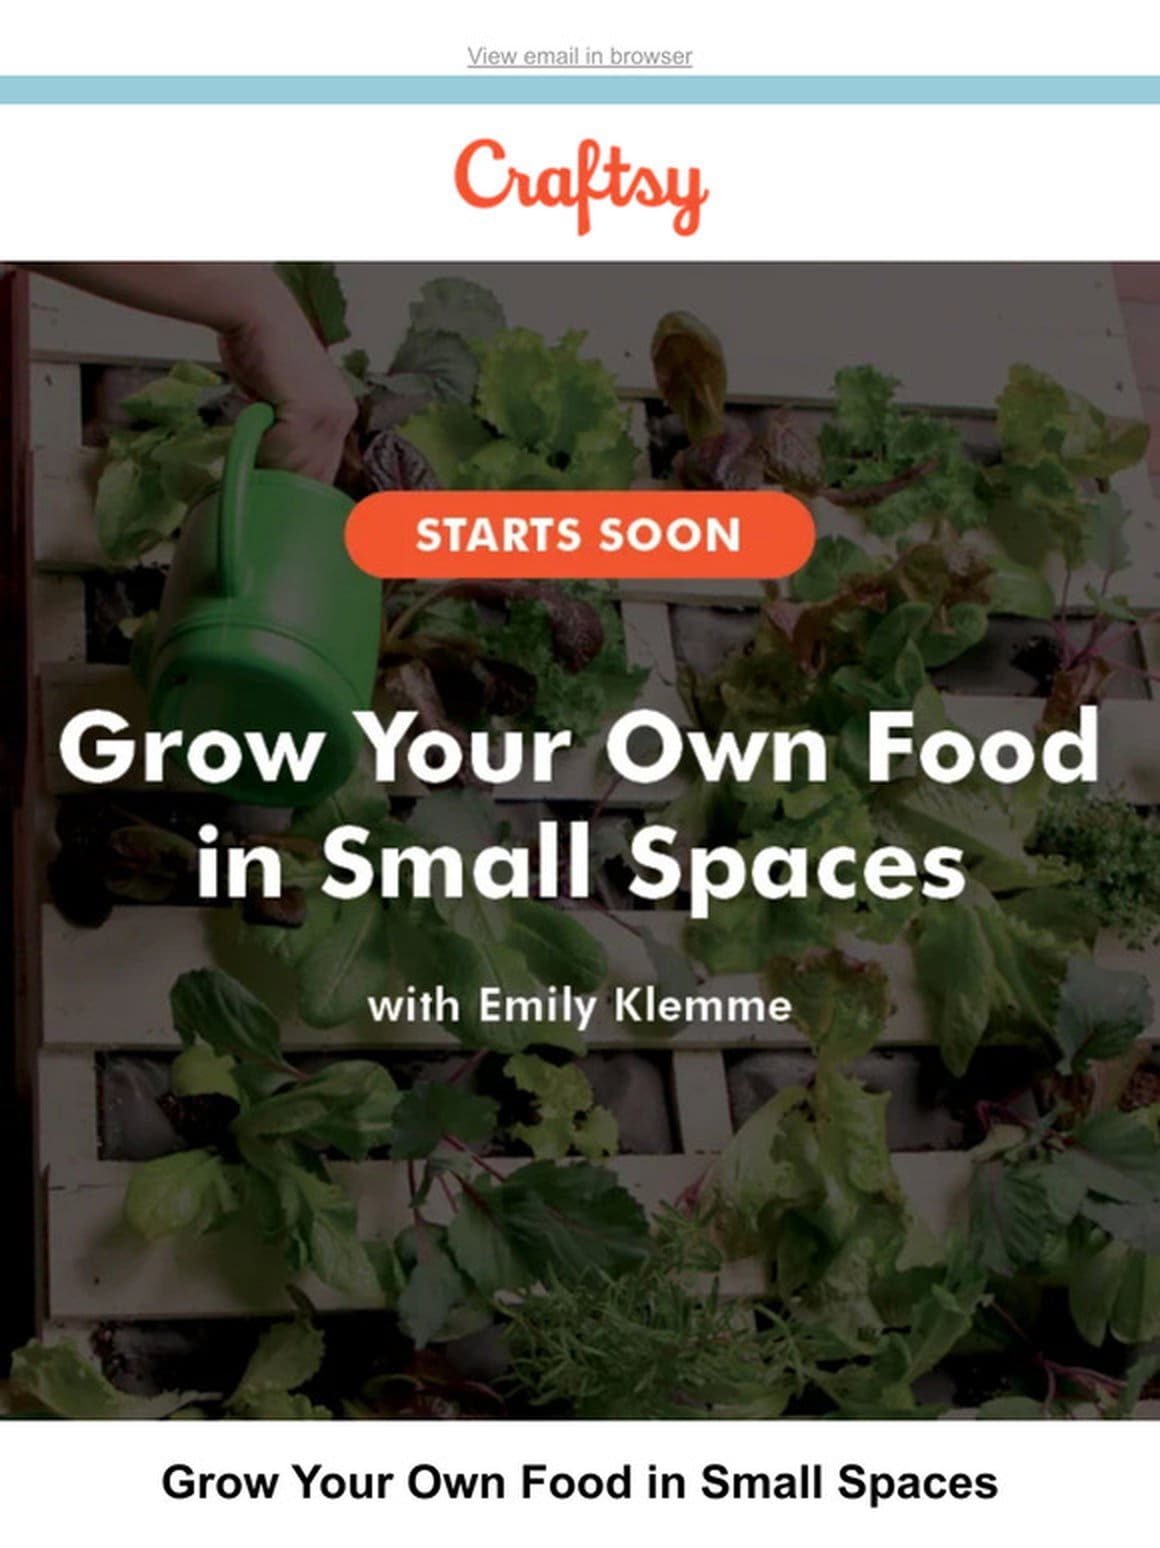 Going LIVE: Grow Your Own Food in Small Spaces